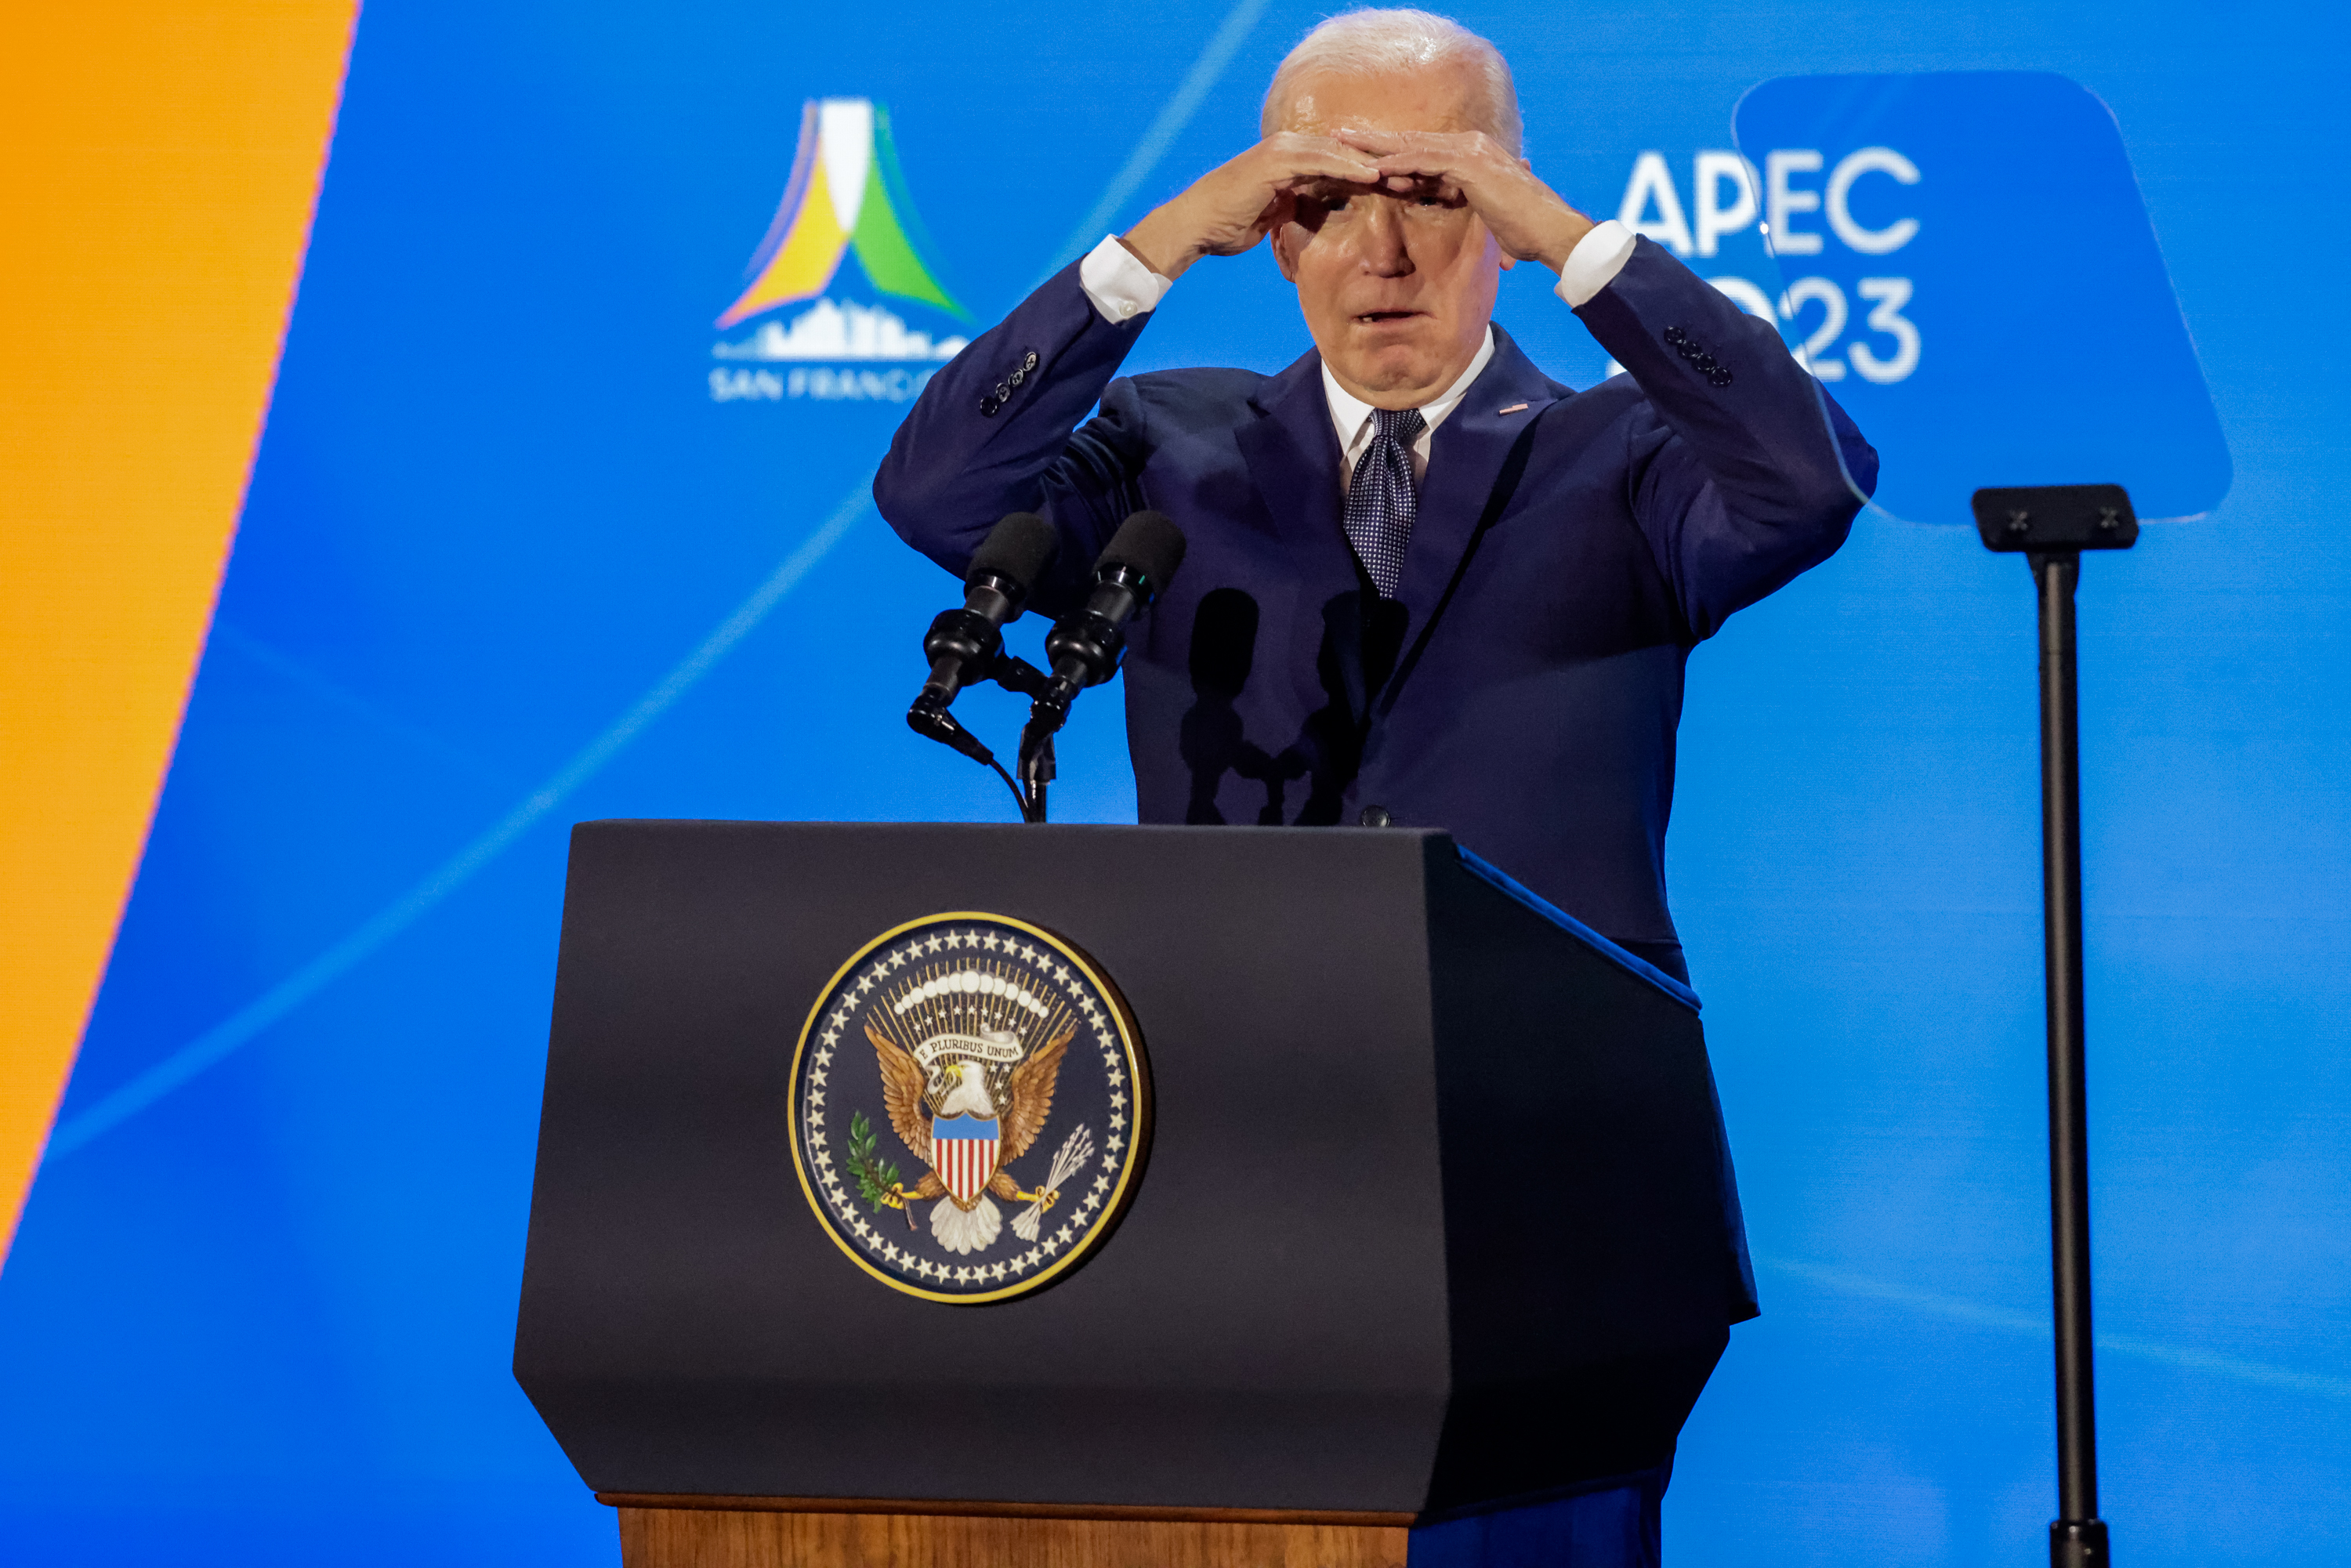 President Joe Biden holds his hands above his eyes to block a glare while standing behind a podium with APEC 2023 in the background.